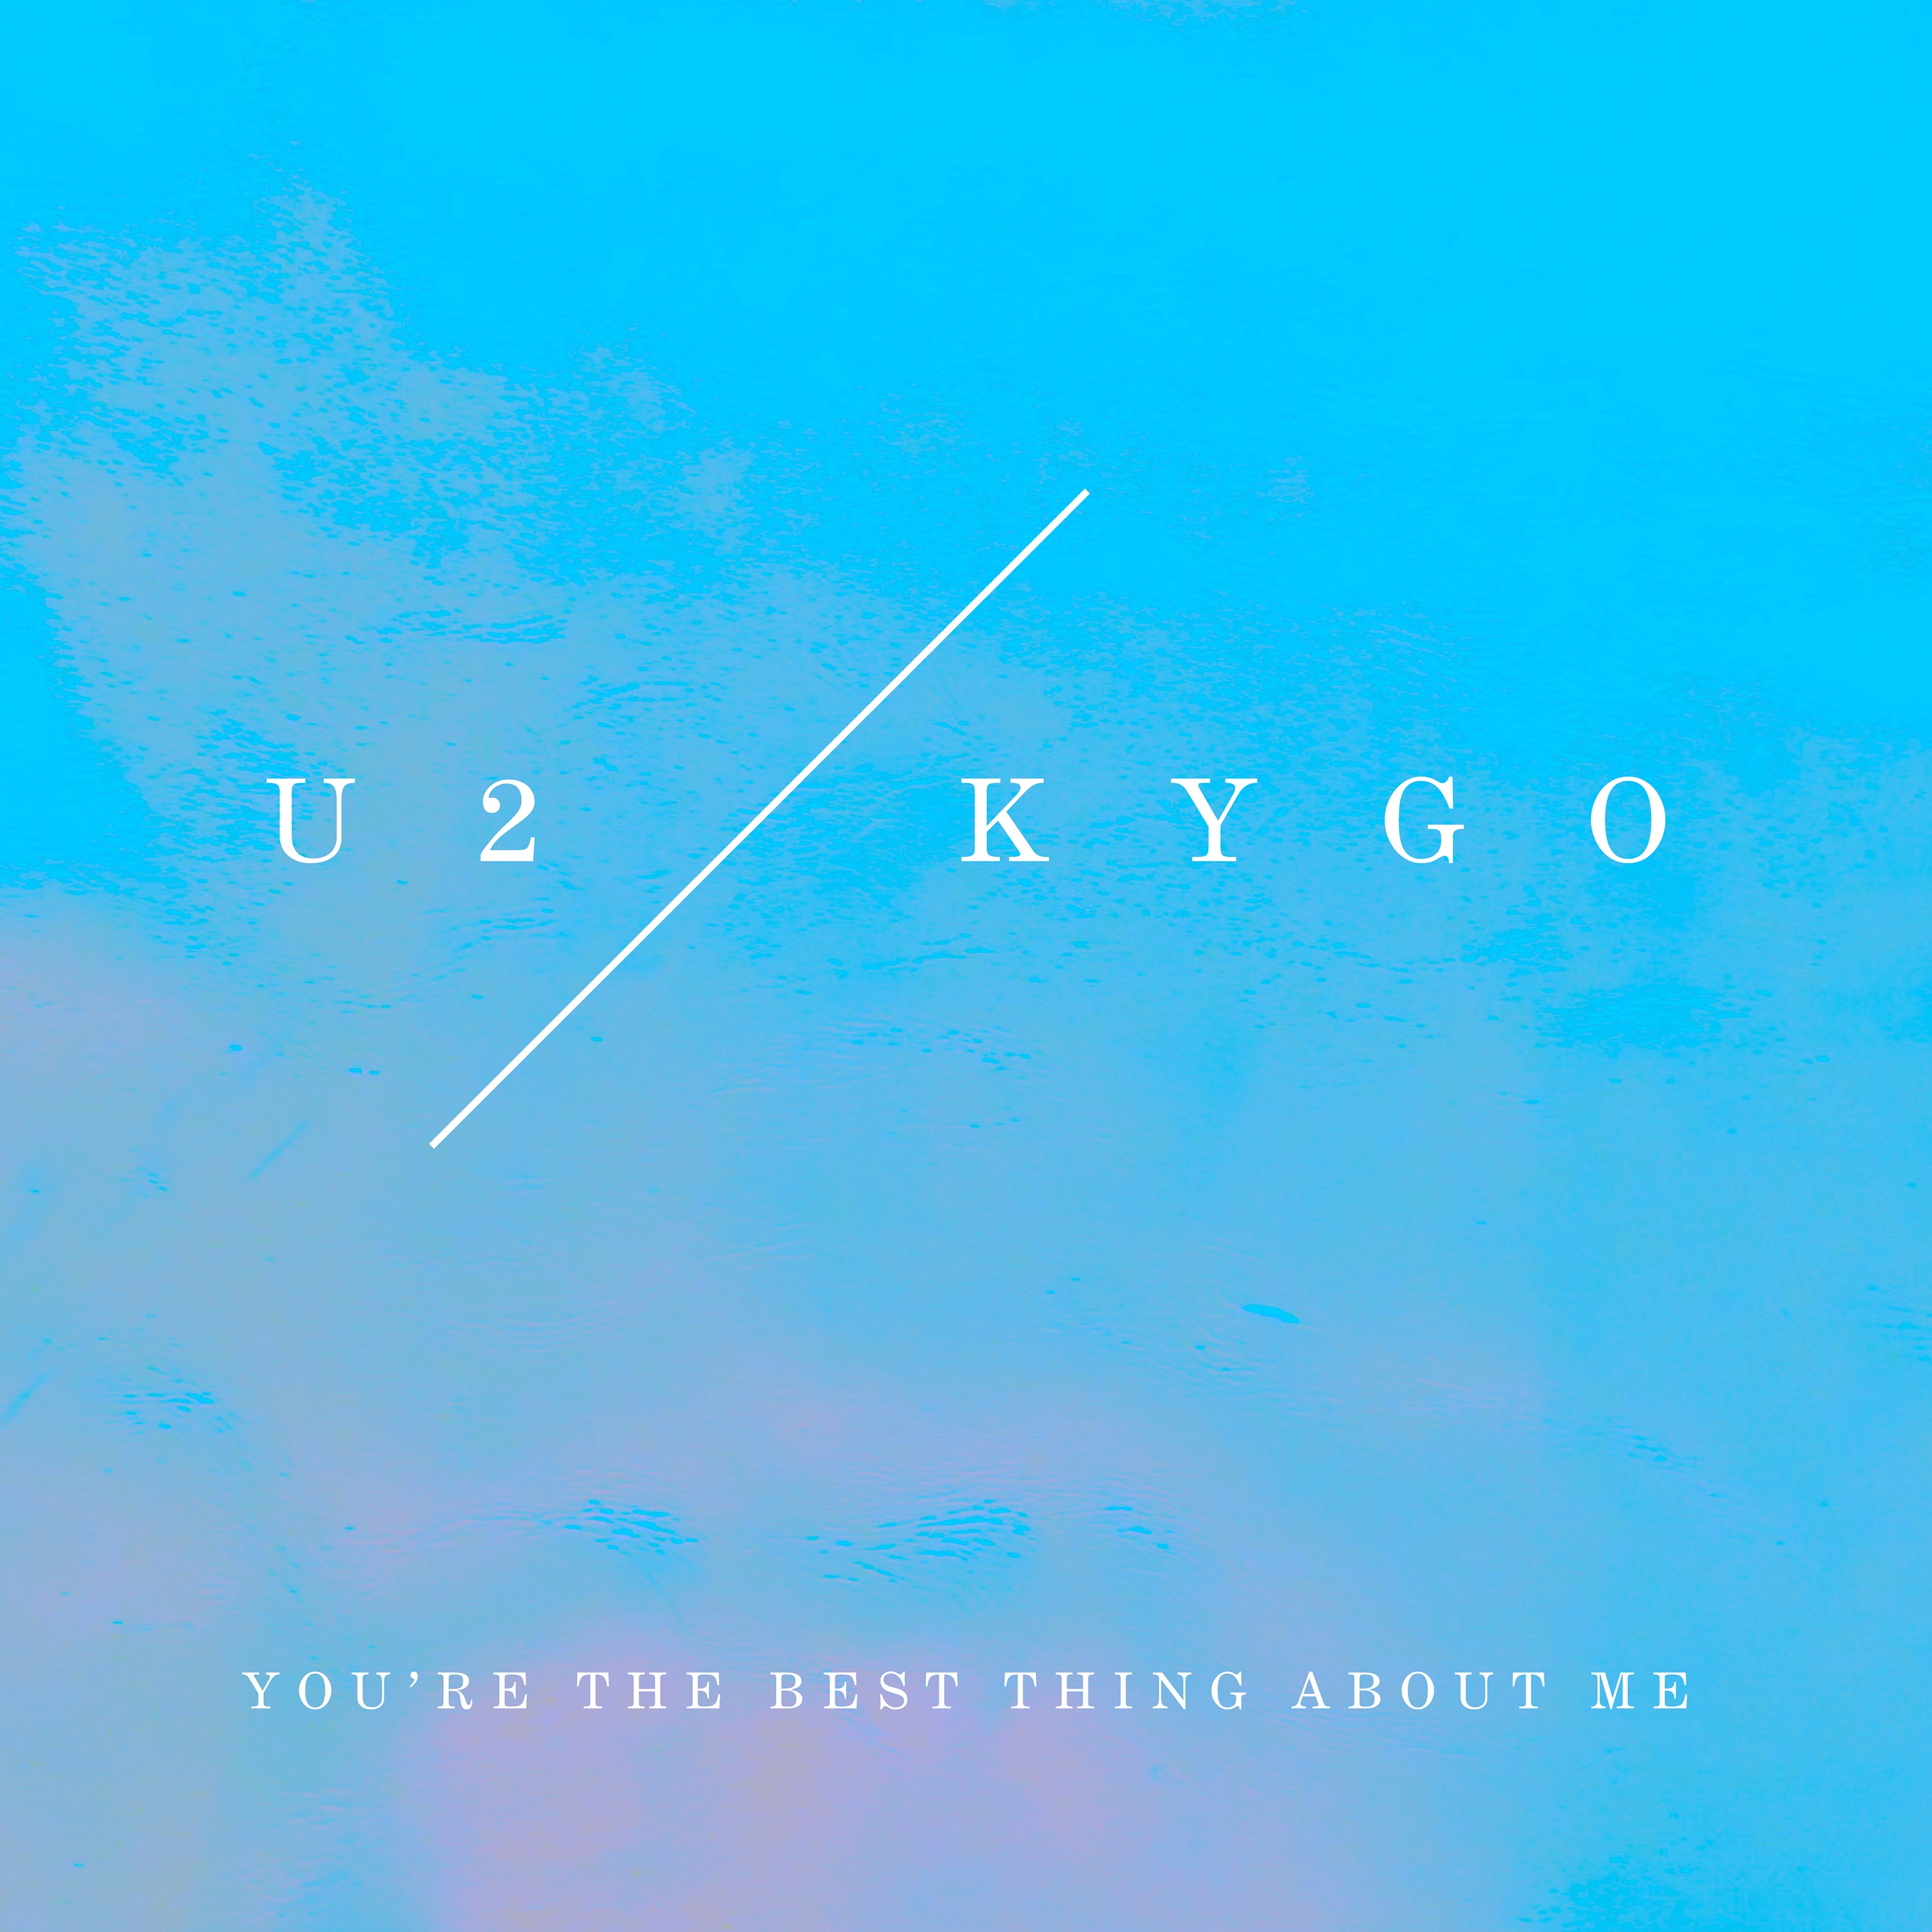 You’re the Best Thing About Me by U2 & Kygo